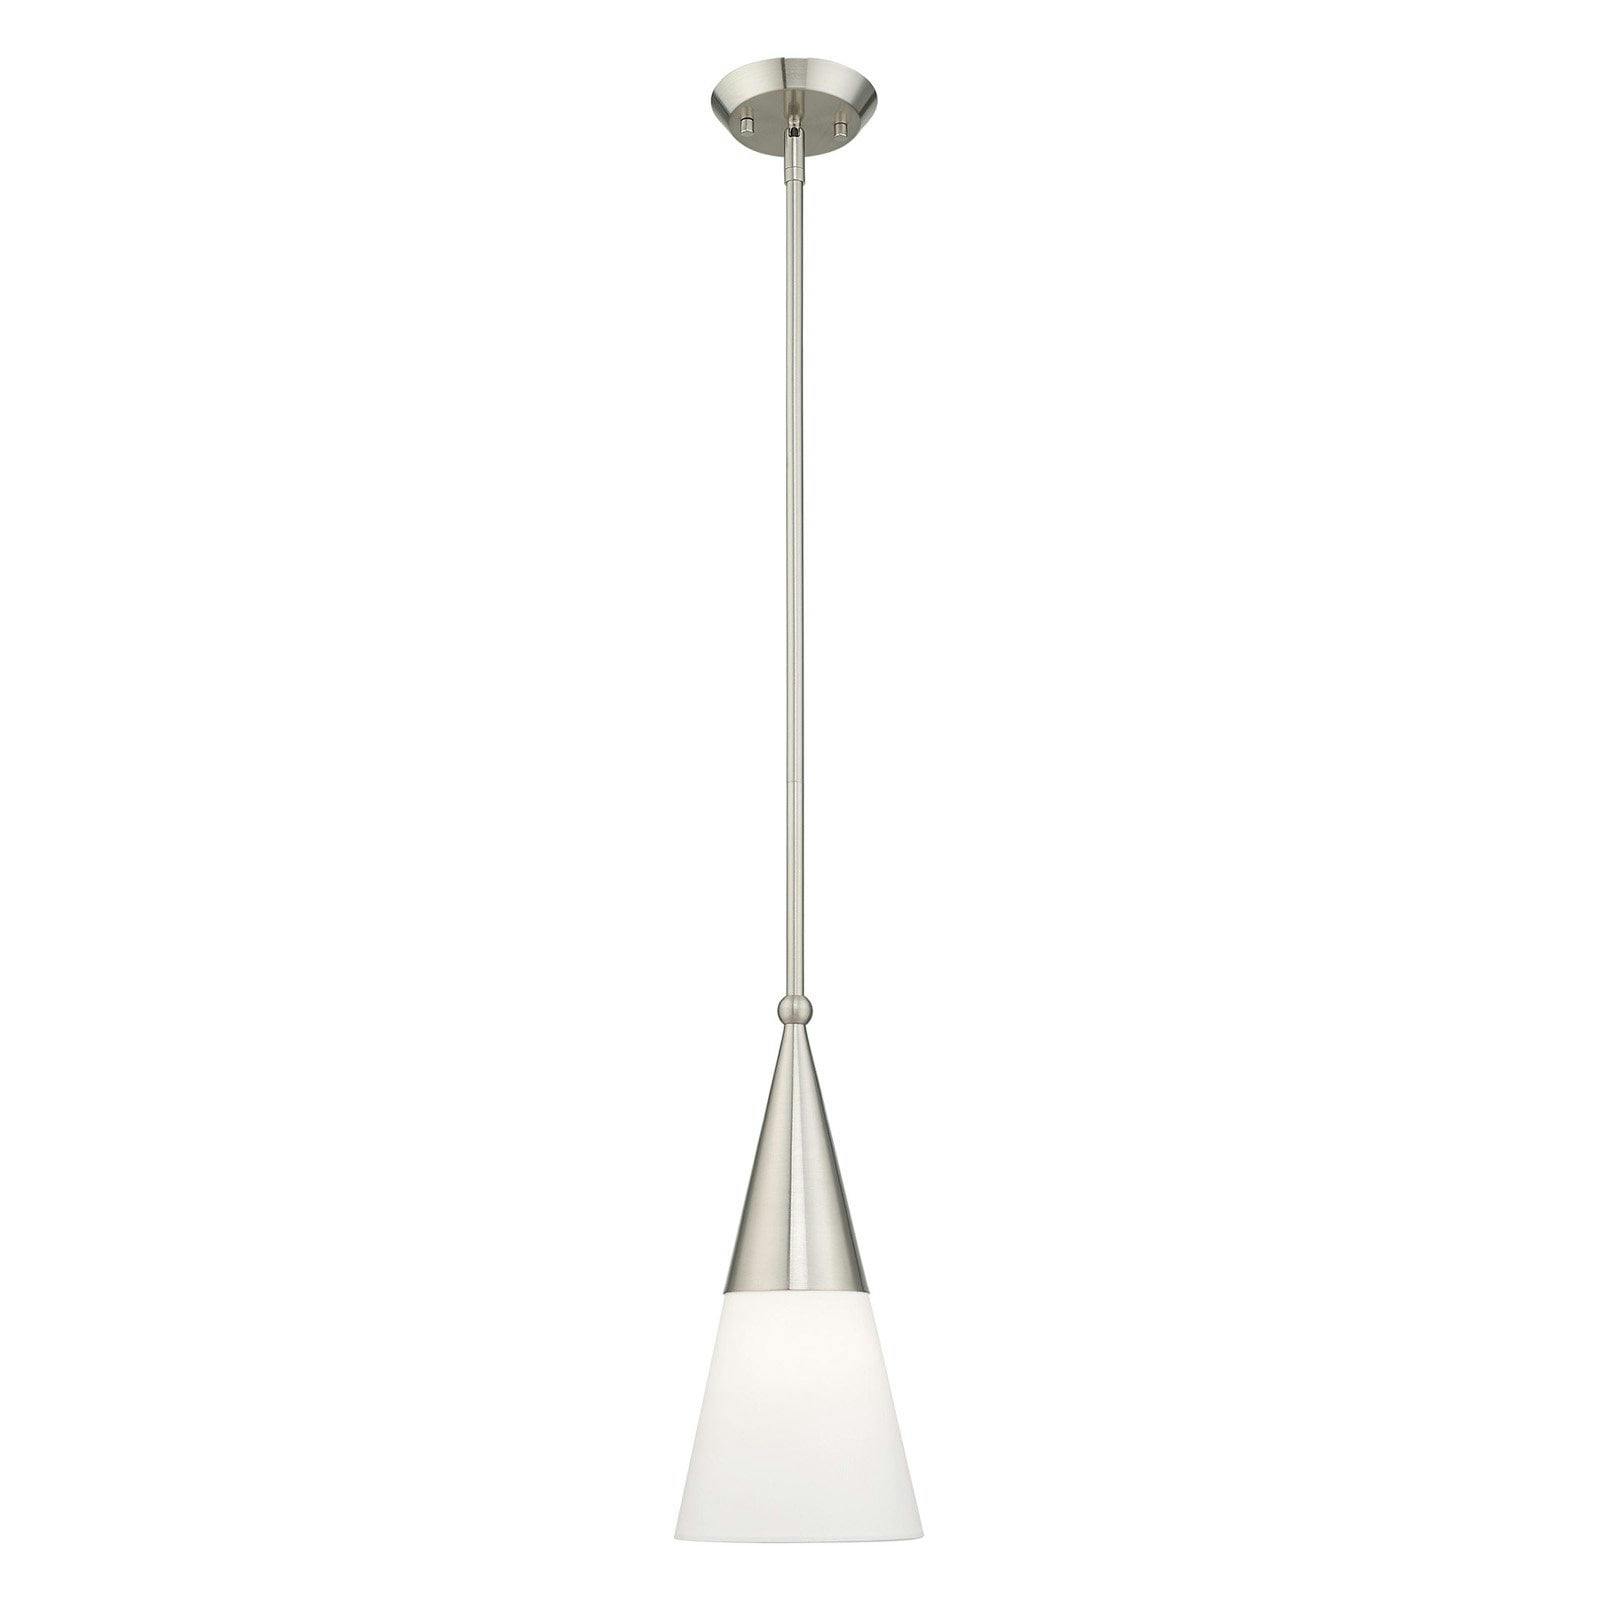 Stockholm Brushed Nickel 1-Light Mini Pendant with Off-White Shade